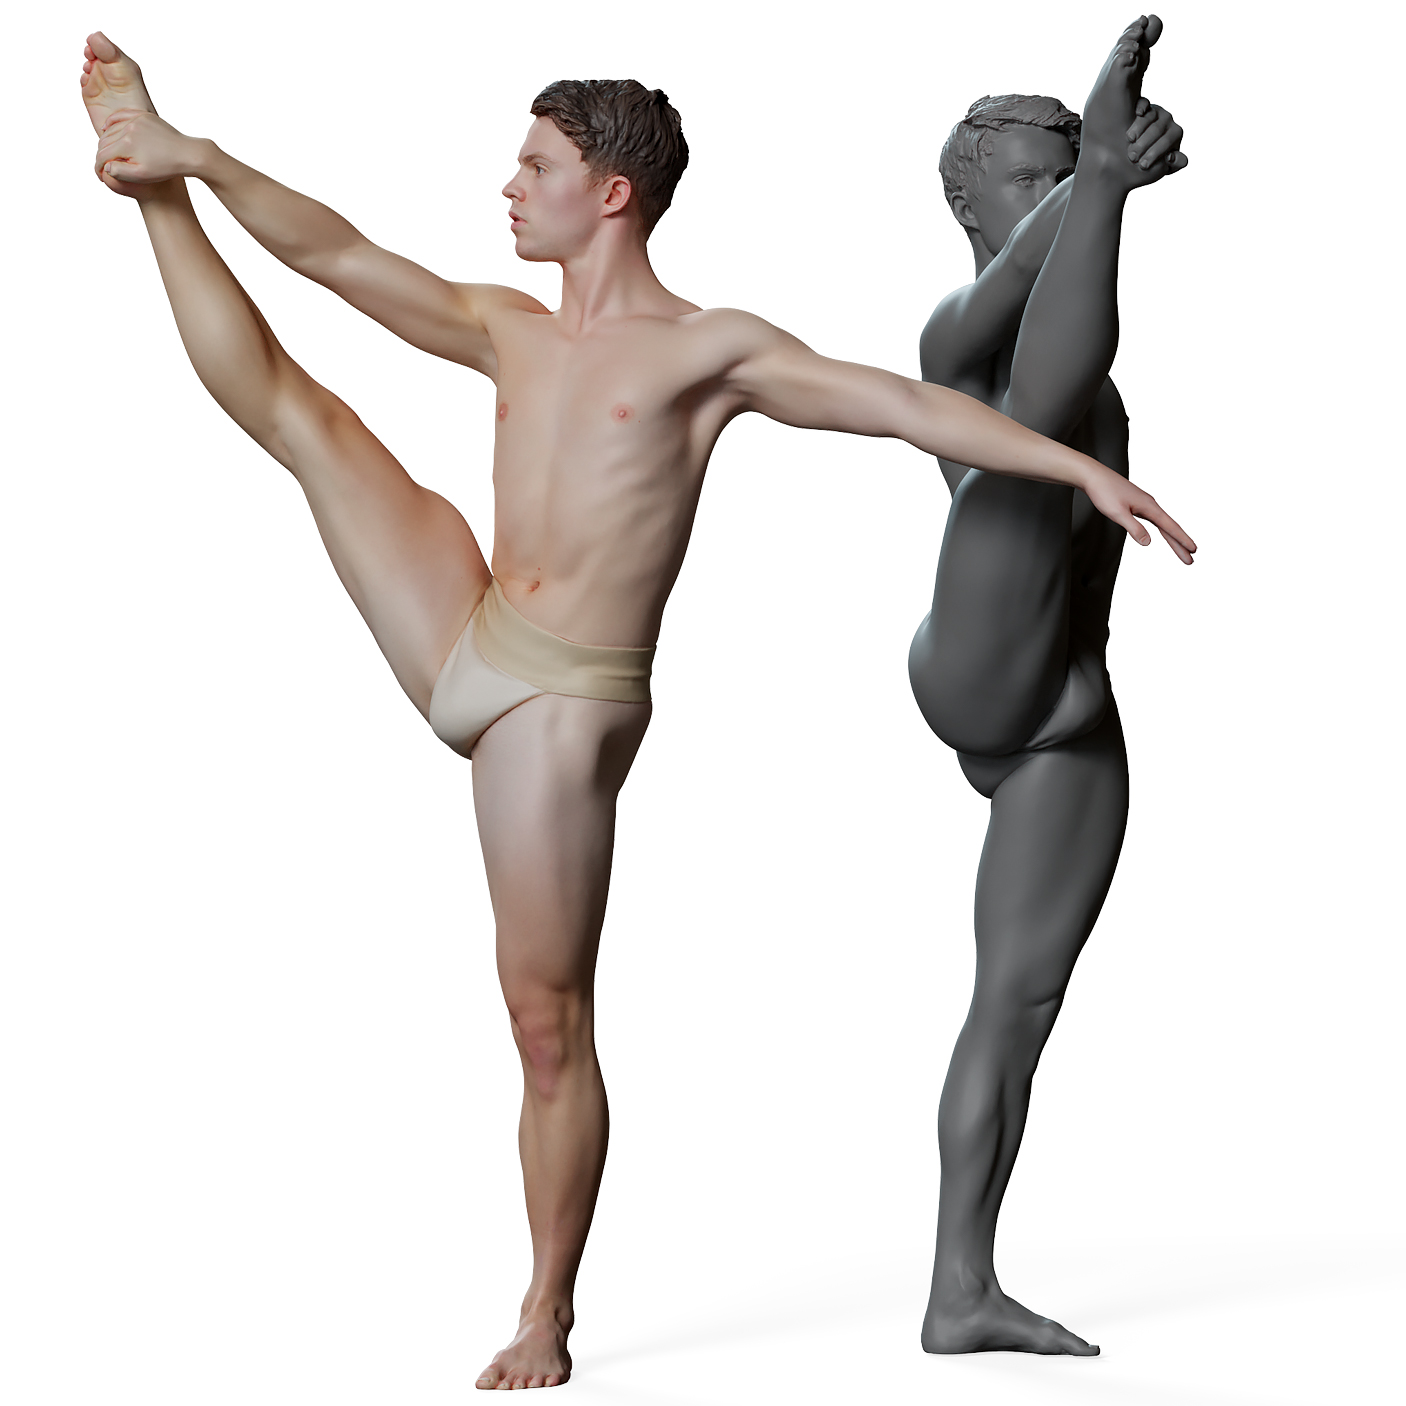 Young Male Dancer Posing Over Grey Stock Photo 72114631 | Shutterstock